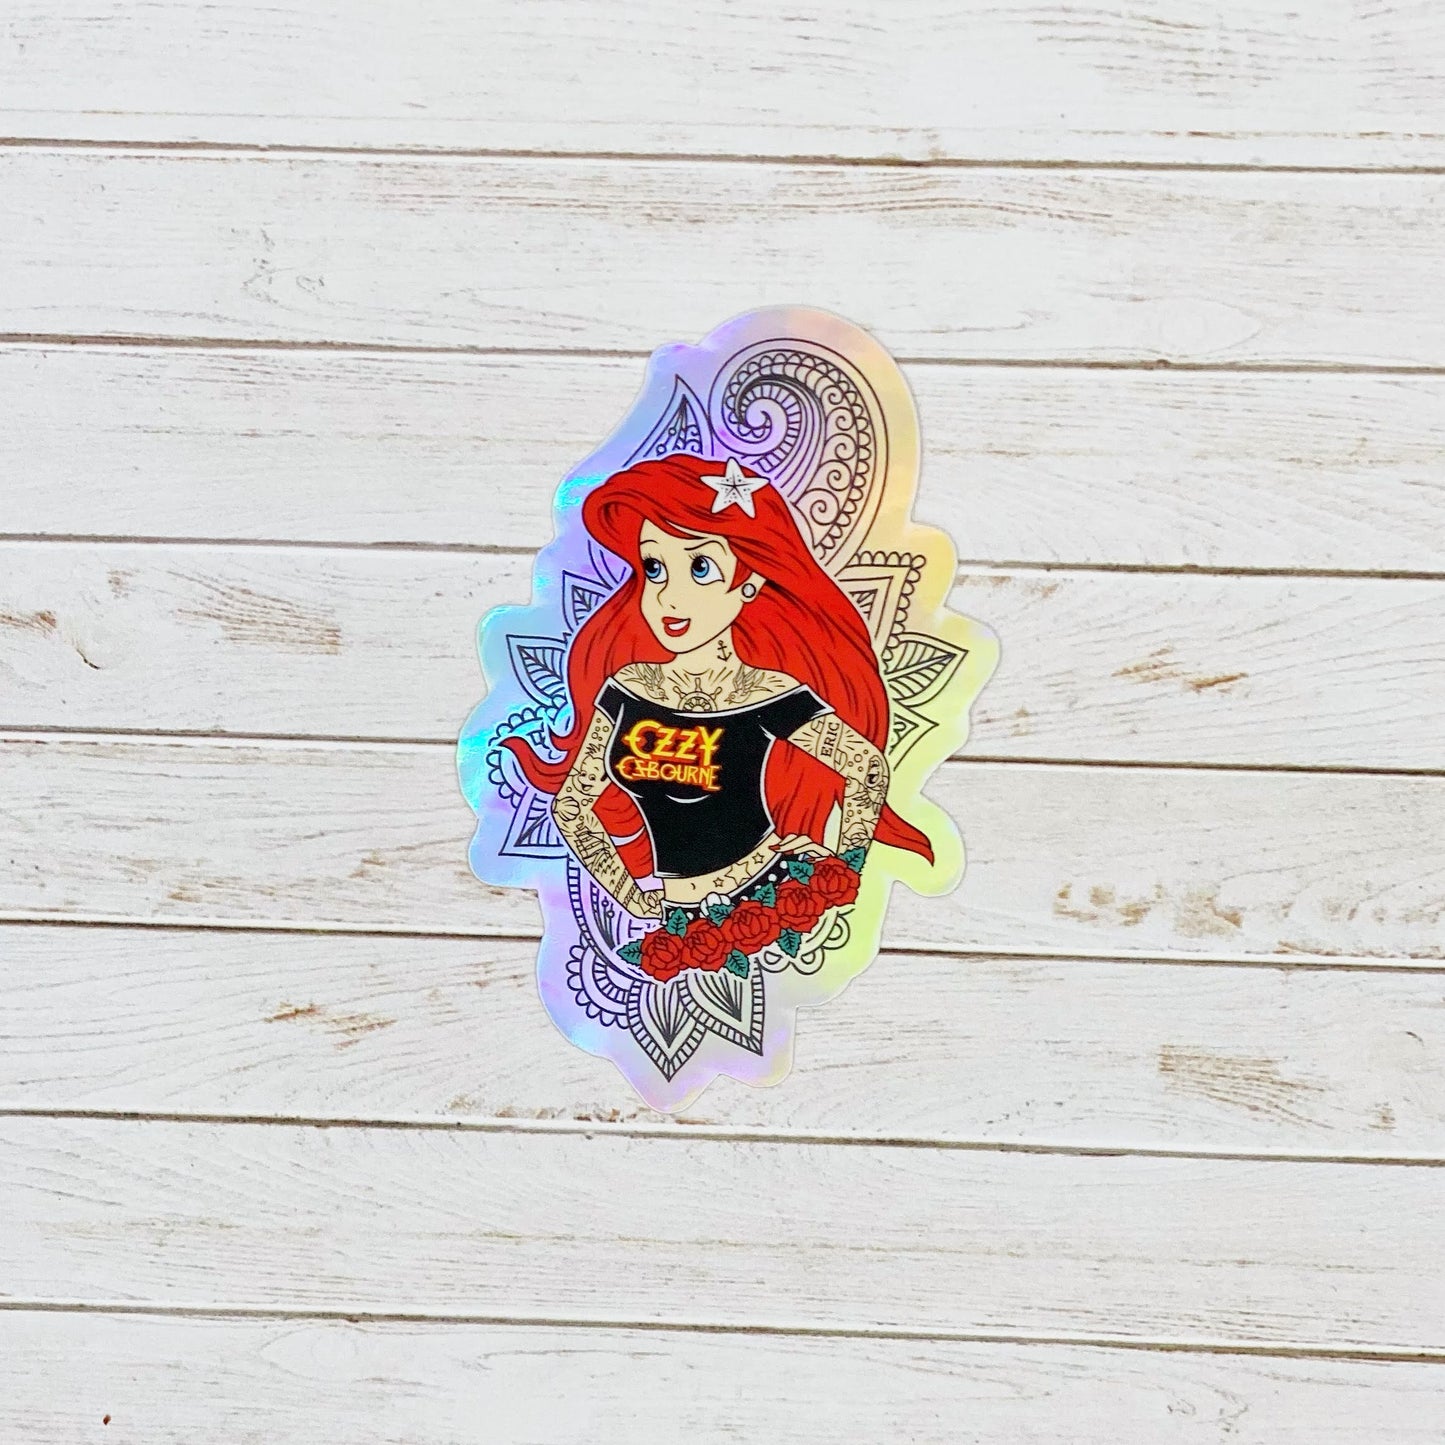 Punk Rock Princess - Modern Princess with Tattoos Holographic Vinyl Decal Stickers